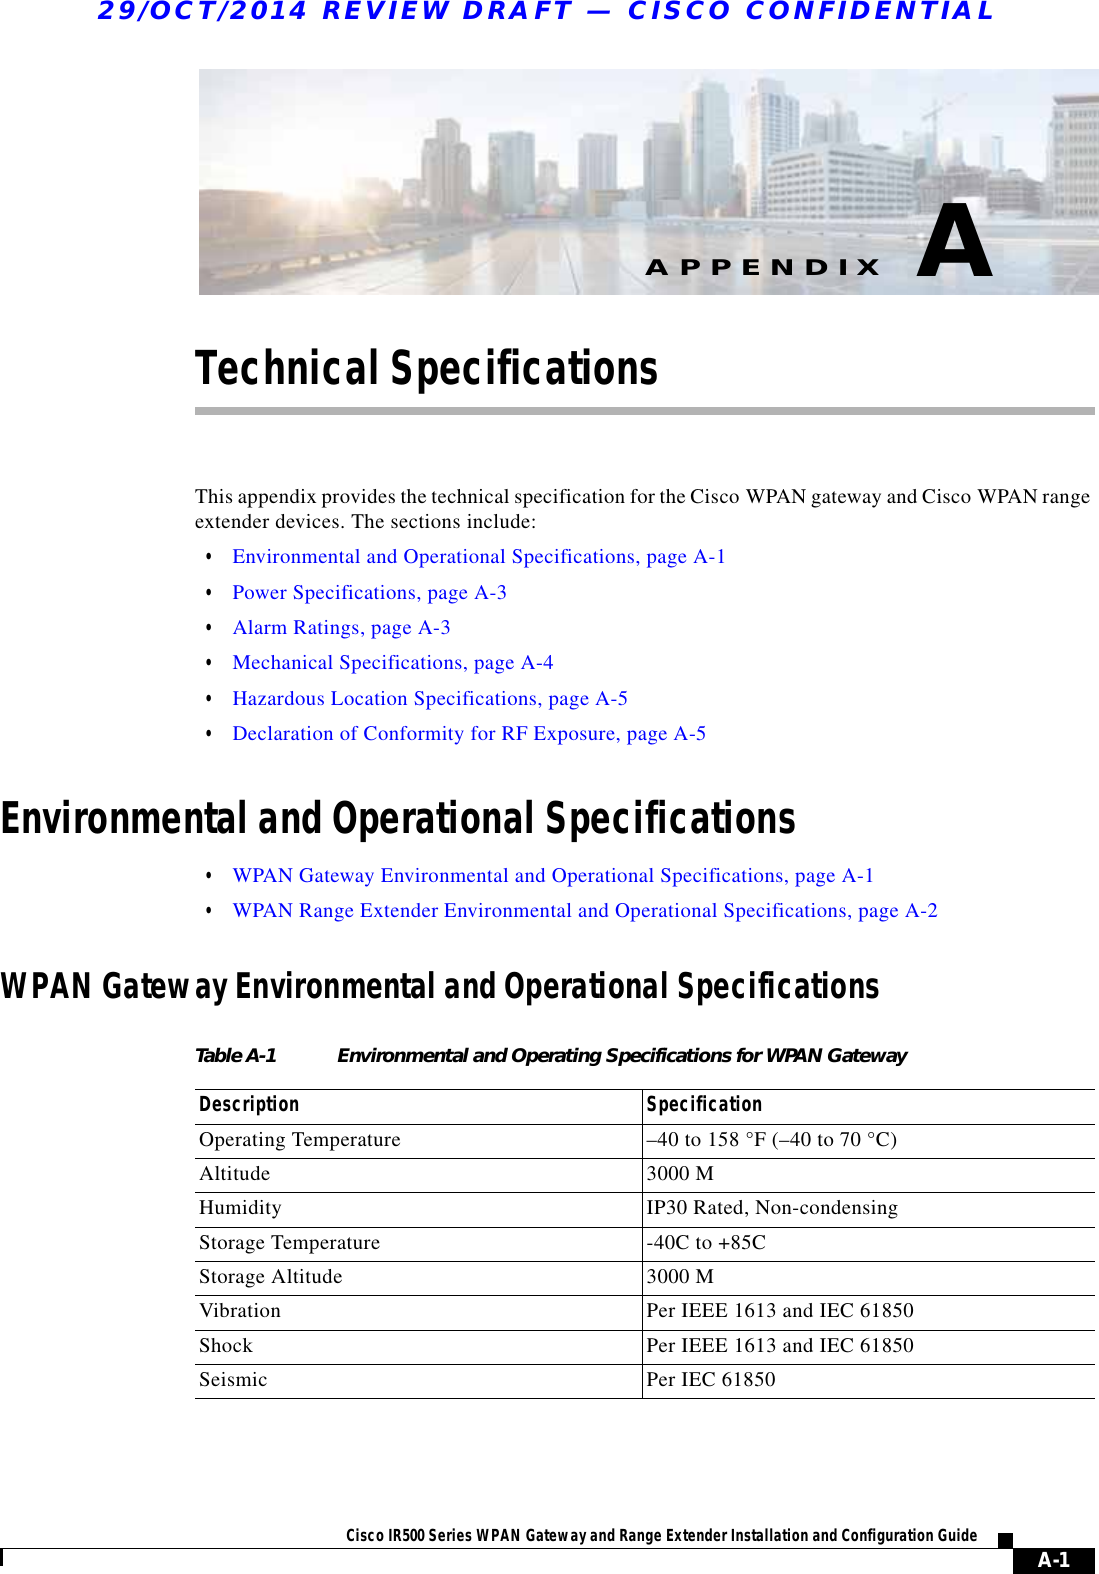 A-1Cisco IR500 Series WPAN Gateway and Range Extender Installation and Configuration Guide APPENDIX29/OCT/2014 REVIEW DRAFT — CISCO CONFIDENTIALATechnical SpecificationsThis appendix provides the technical specification for the Cisco WPAN gateway and Cisco WPAN range extender devices. The sections include:  • Environmental and Operational Specifications, page A-1  • Power Specifications, page A-3  • Alarm Ratings, page A-3  • Mechanical Specifications, page A-4  • Hazardous Location Specifications, page A-5  • Declaration of Conformity for RF Exposure, page A-5Environmental and Operational Specifications  • WPAN Gateway Environmental and Operational Specifications, page A-1  • WPAN Range Extender Environmental and Operational Specifications, page A-2WPAN Gateway Environmental and Operational SpecificationsTable A-1 Environmental and Operating Specifications for WPAN Gateway Description SpecificationOperating Temperature –40 to 158 °F (–40 to 70 °C)Altitude 3000 MHumidity IP30 Rated, Non-condensingStorage Temperature -40C to +85CStorage Altitude 3000 MVibration Per IEEE 1613 and IEC 61850Shock Per IEEE 1613 and IEC 61850Seismic Per IEC 61850